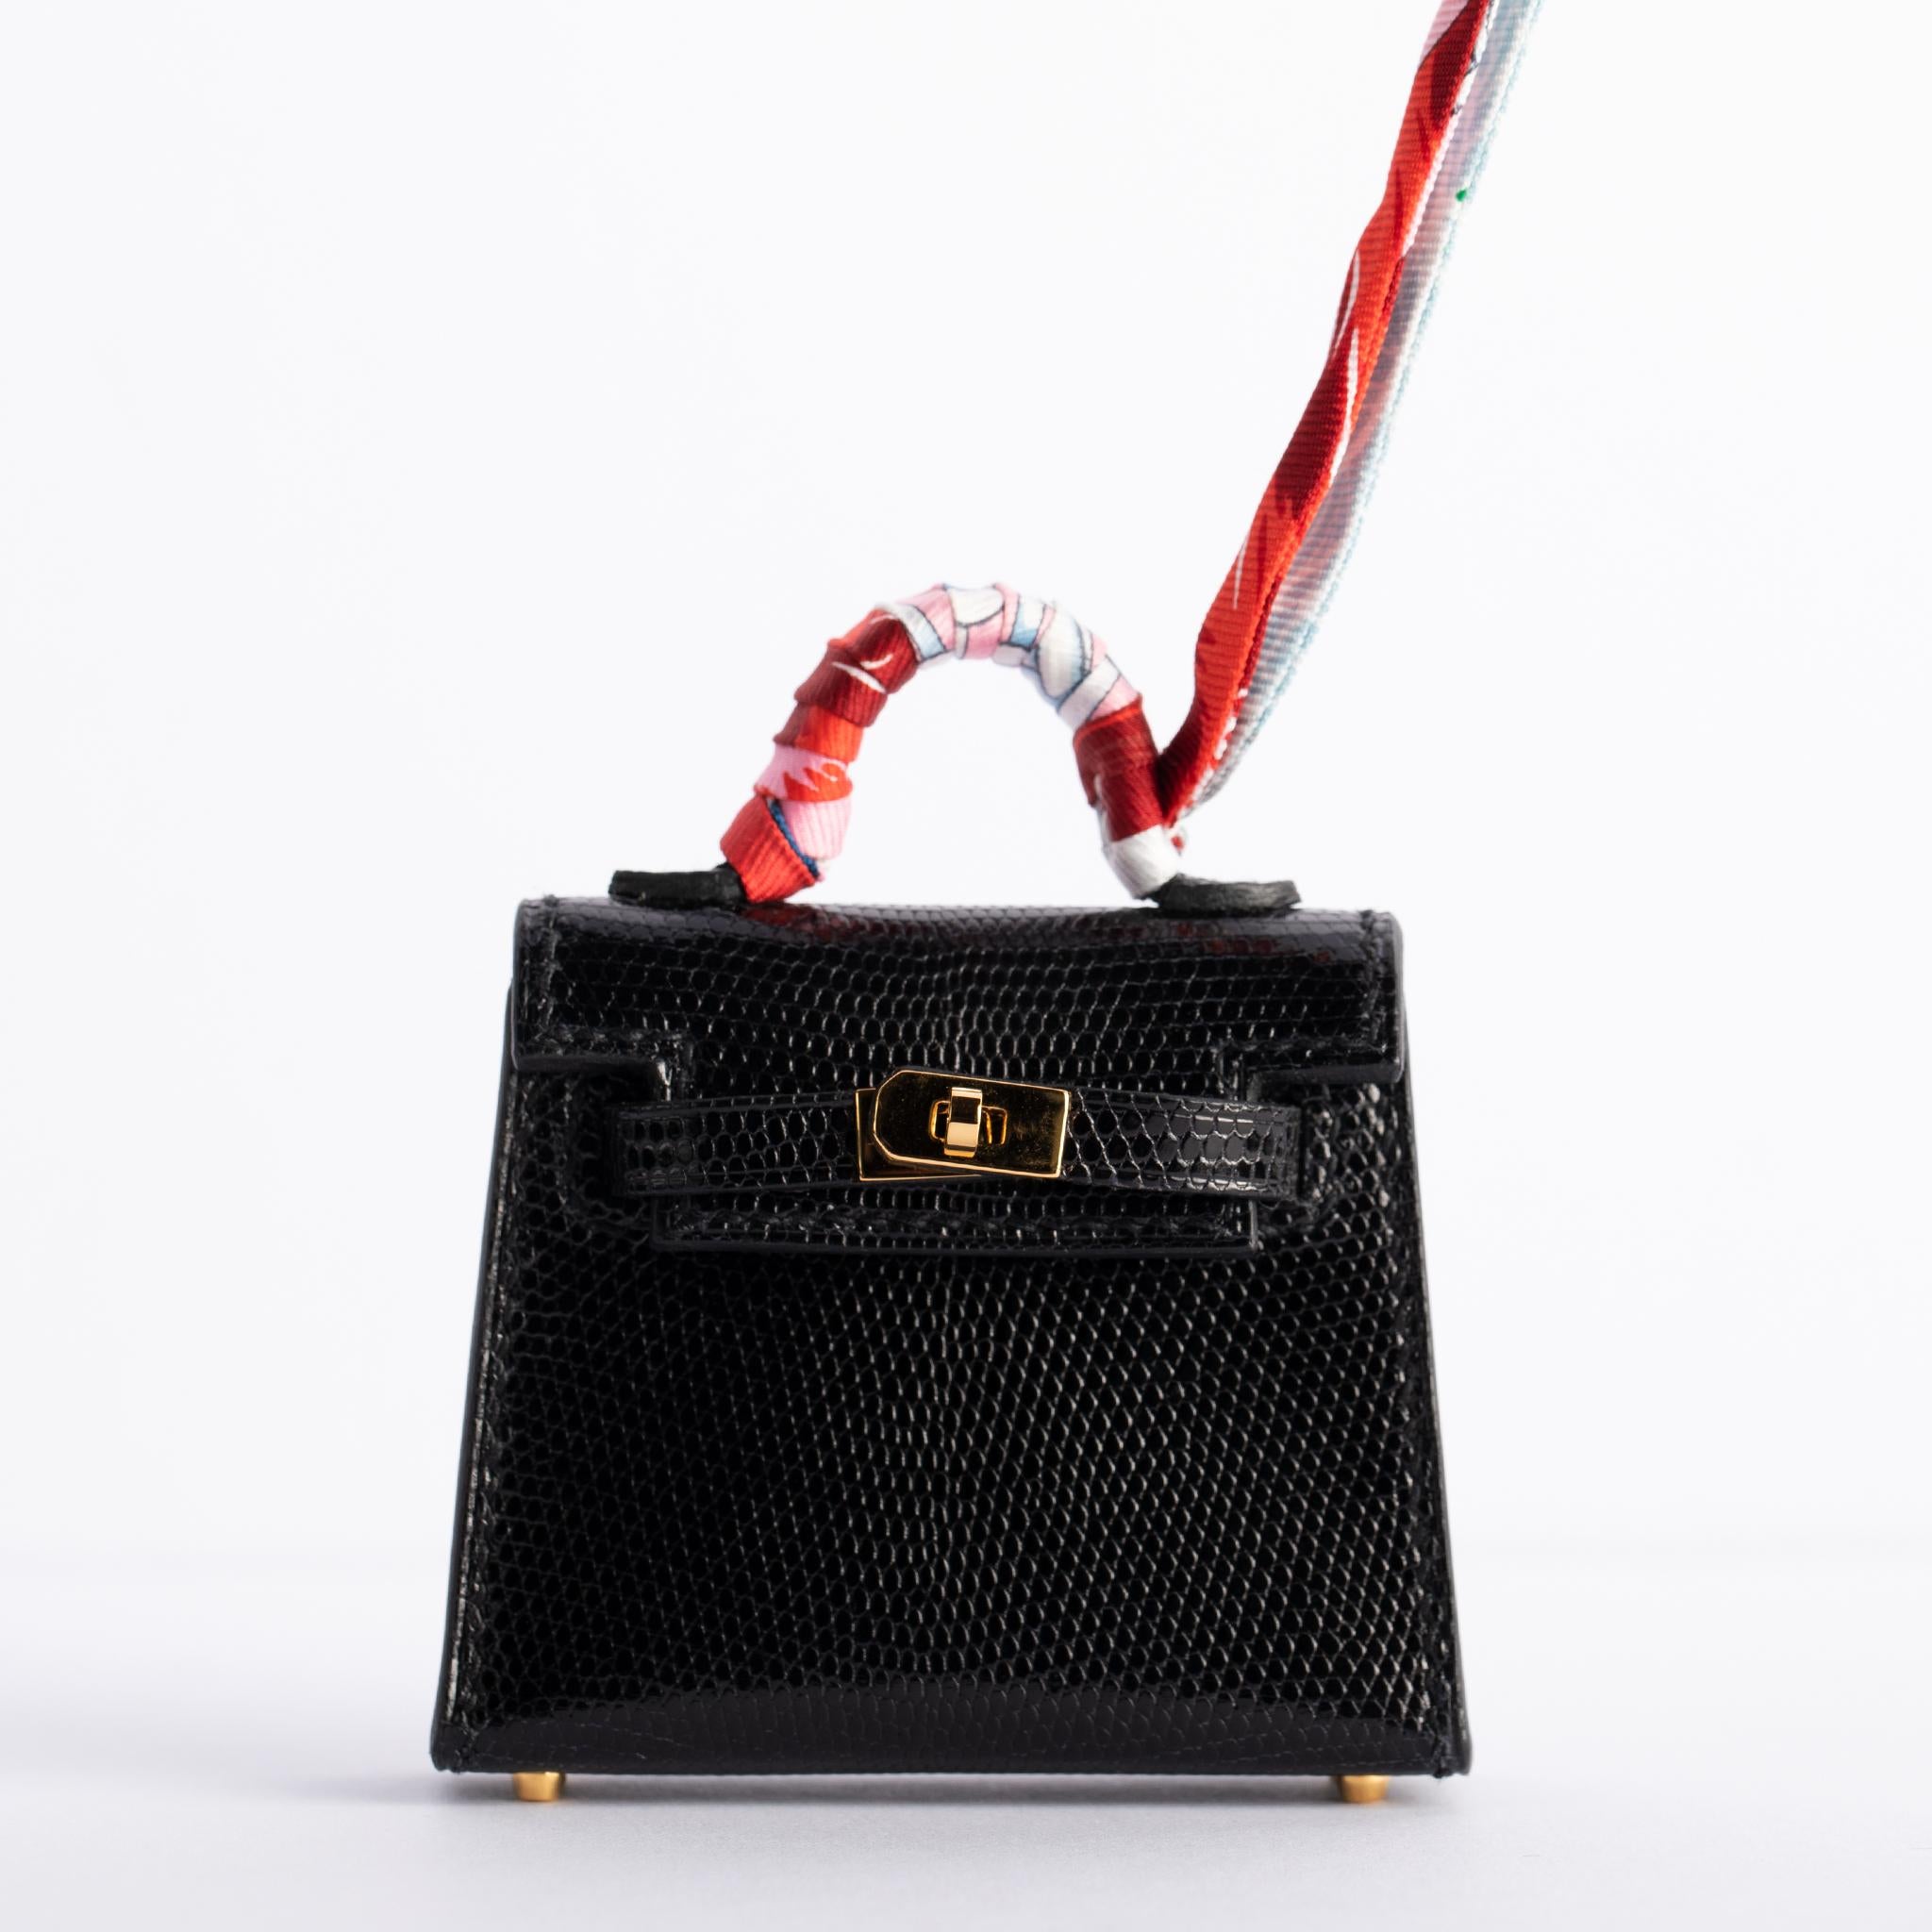 1stdibs Exclusive Hermès Kelly Charm Black Lizard Gold Hardware In New Condition For Sale In Sydney, New South Wales